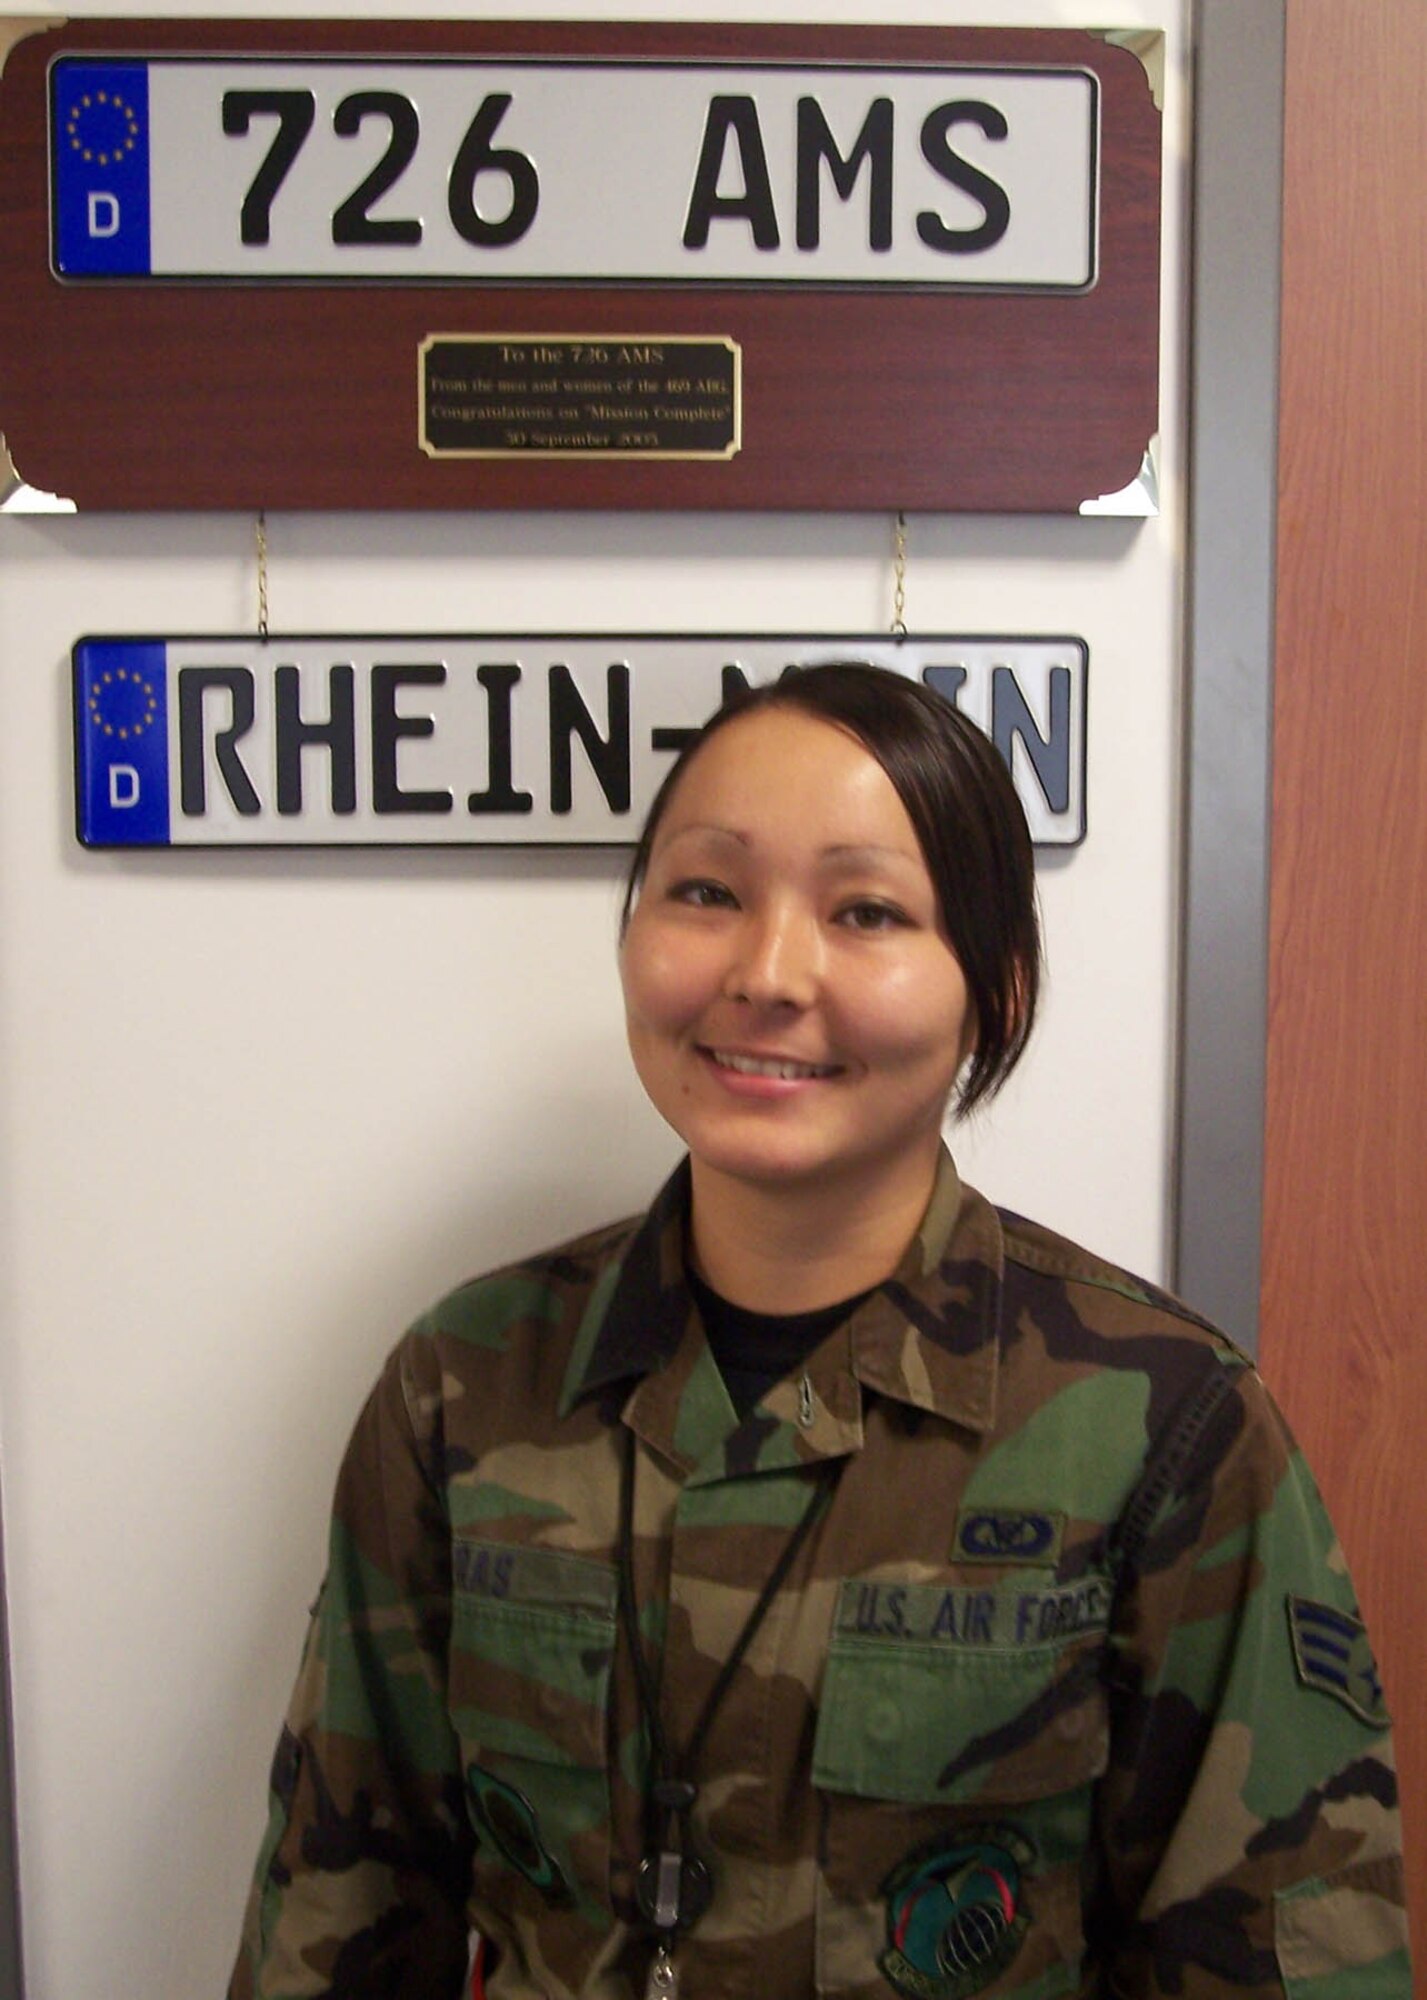 SPANGDAHLEM AIR BASE, Germany  -- Senior Airman Lynnette Ras, 726th Air Mobility Squadron Air Mobility Control Center senior controller, has been named the 52nd Fighter Wing's Top Saber Performer for the week of Nov. 16 - 22. (Courtesy photo)